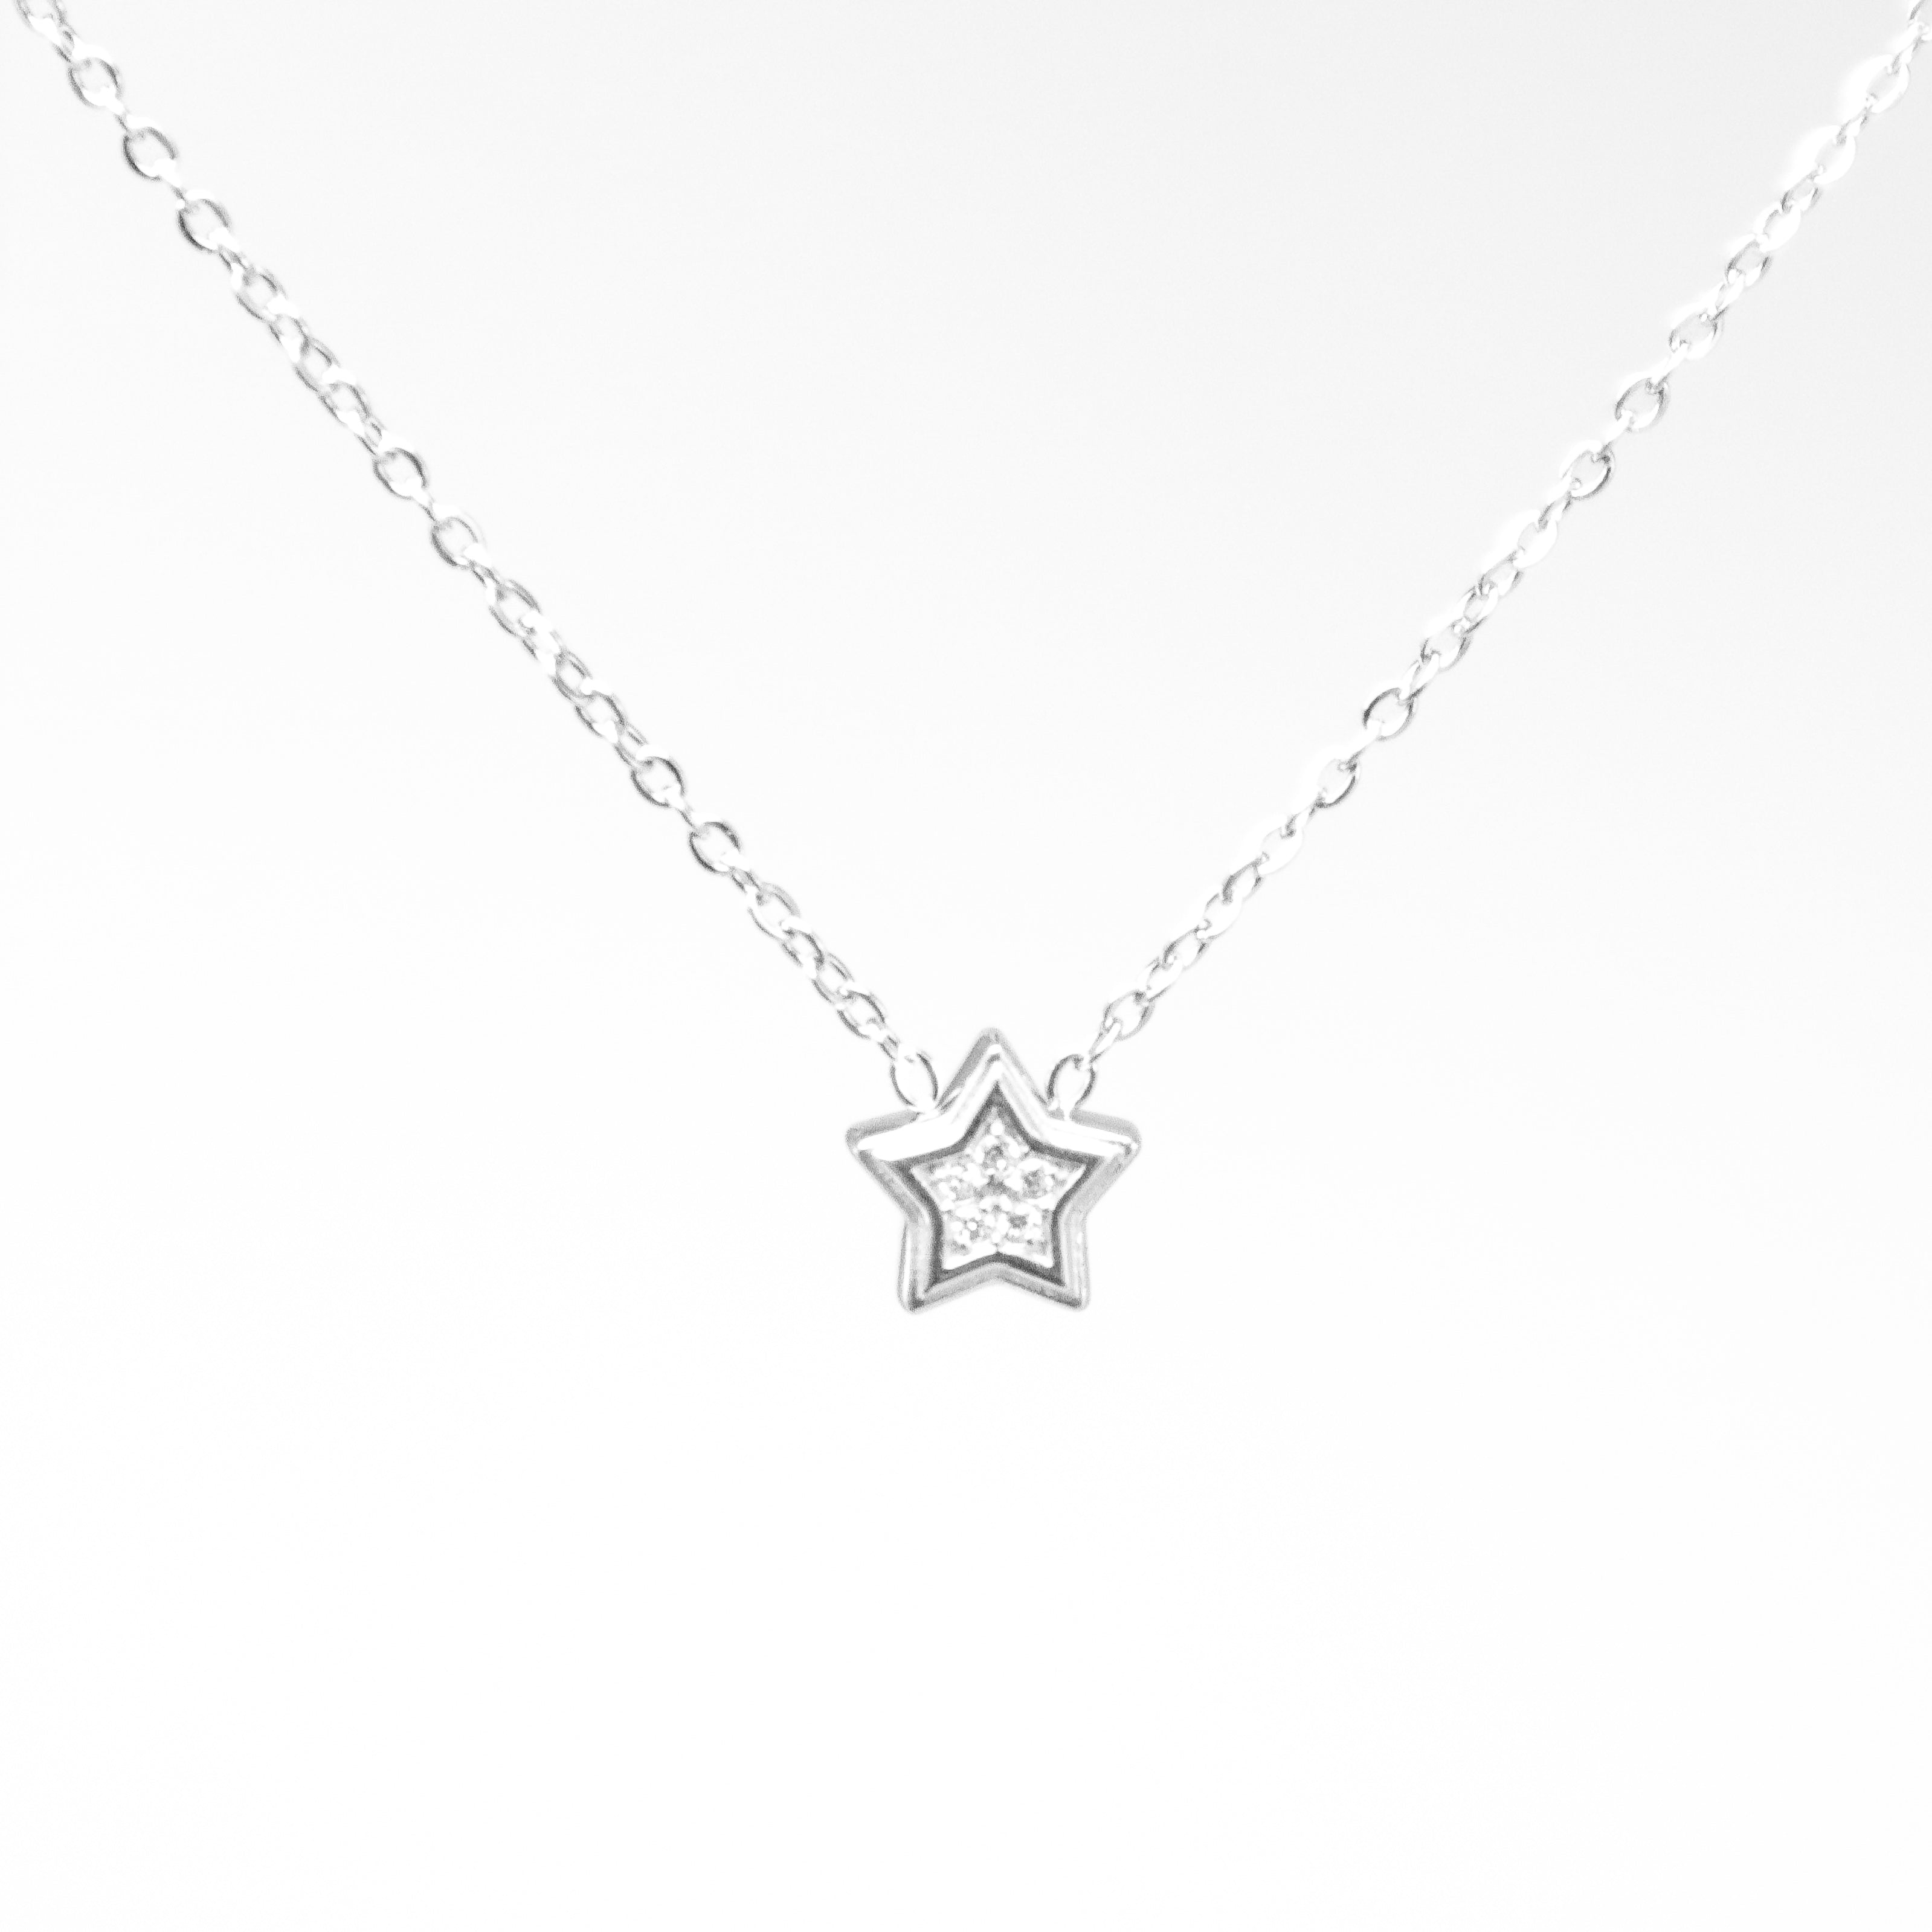 Reversible Dainty Silver Star Necklace